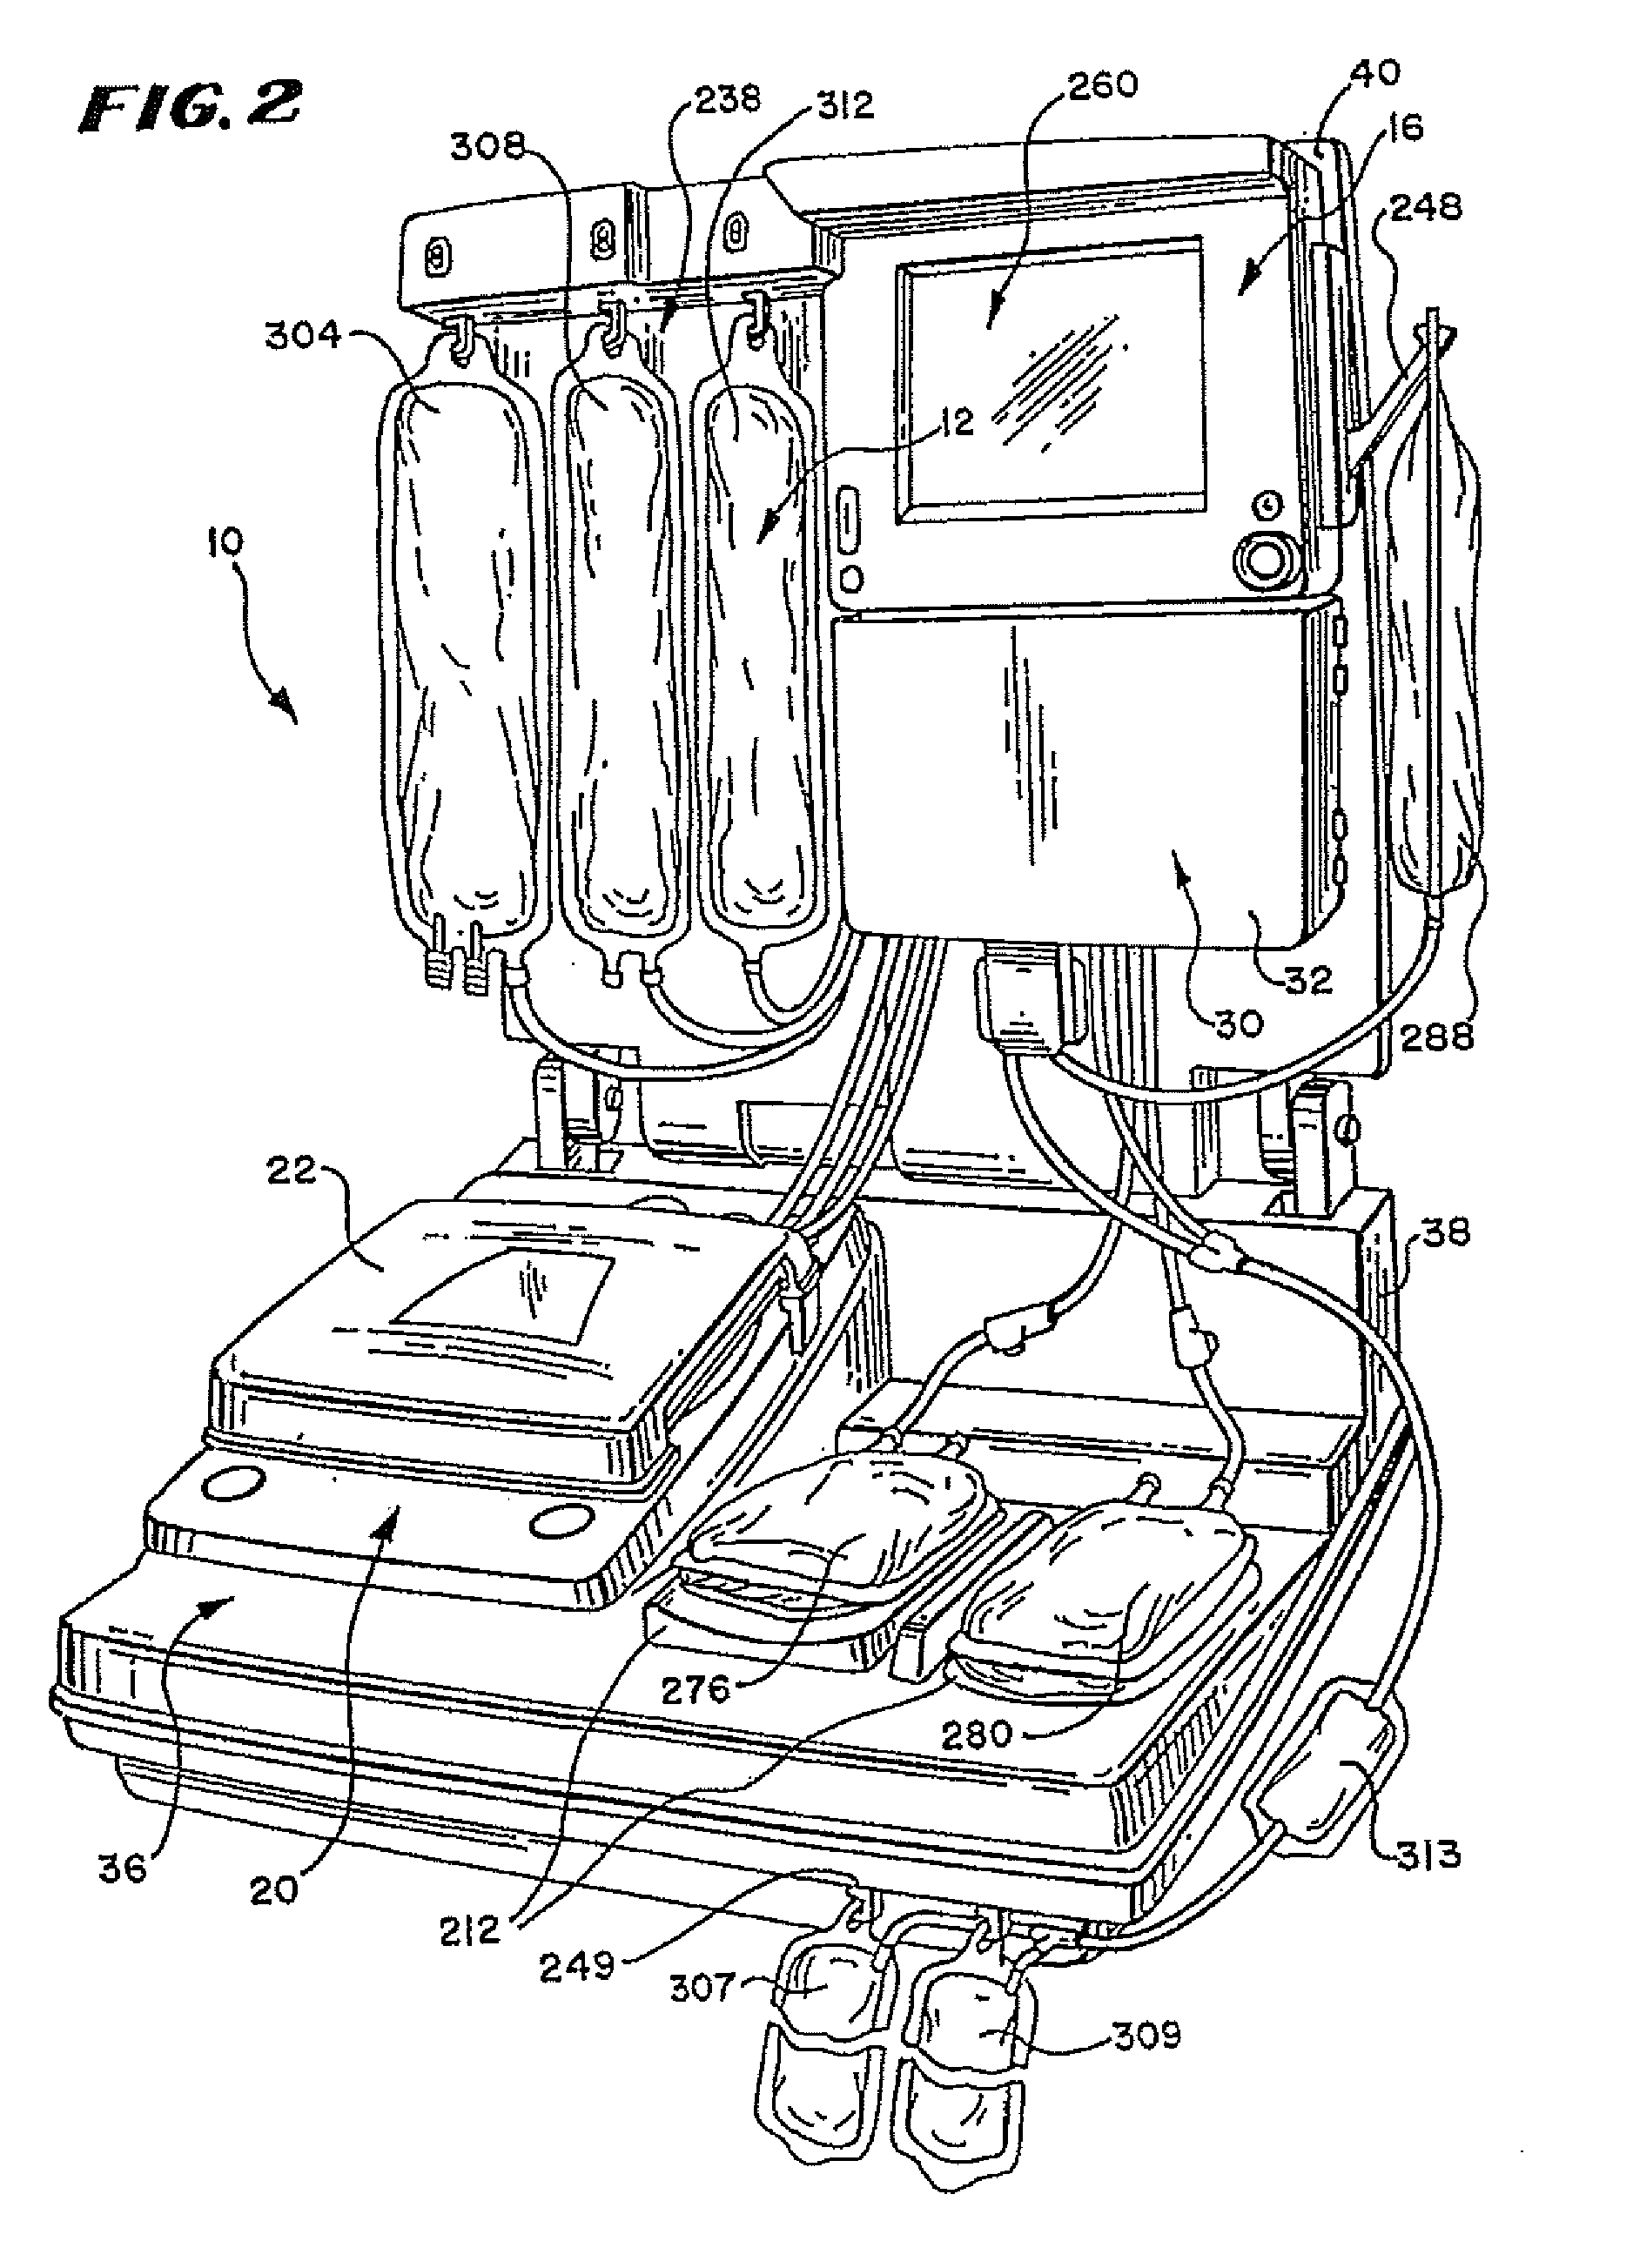 Blood Processing Systems And Methods That Employ An In-Line Flexible Leukofilter